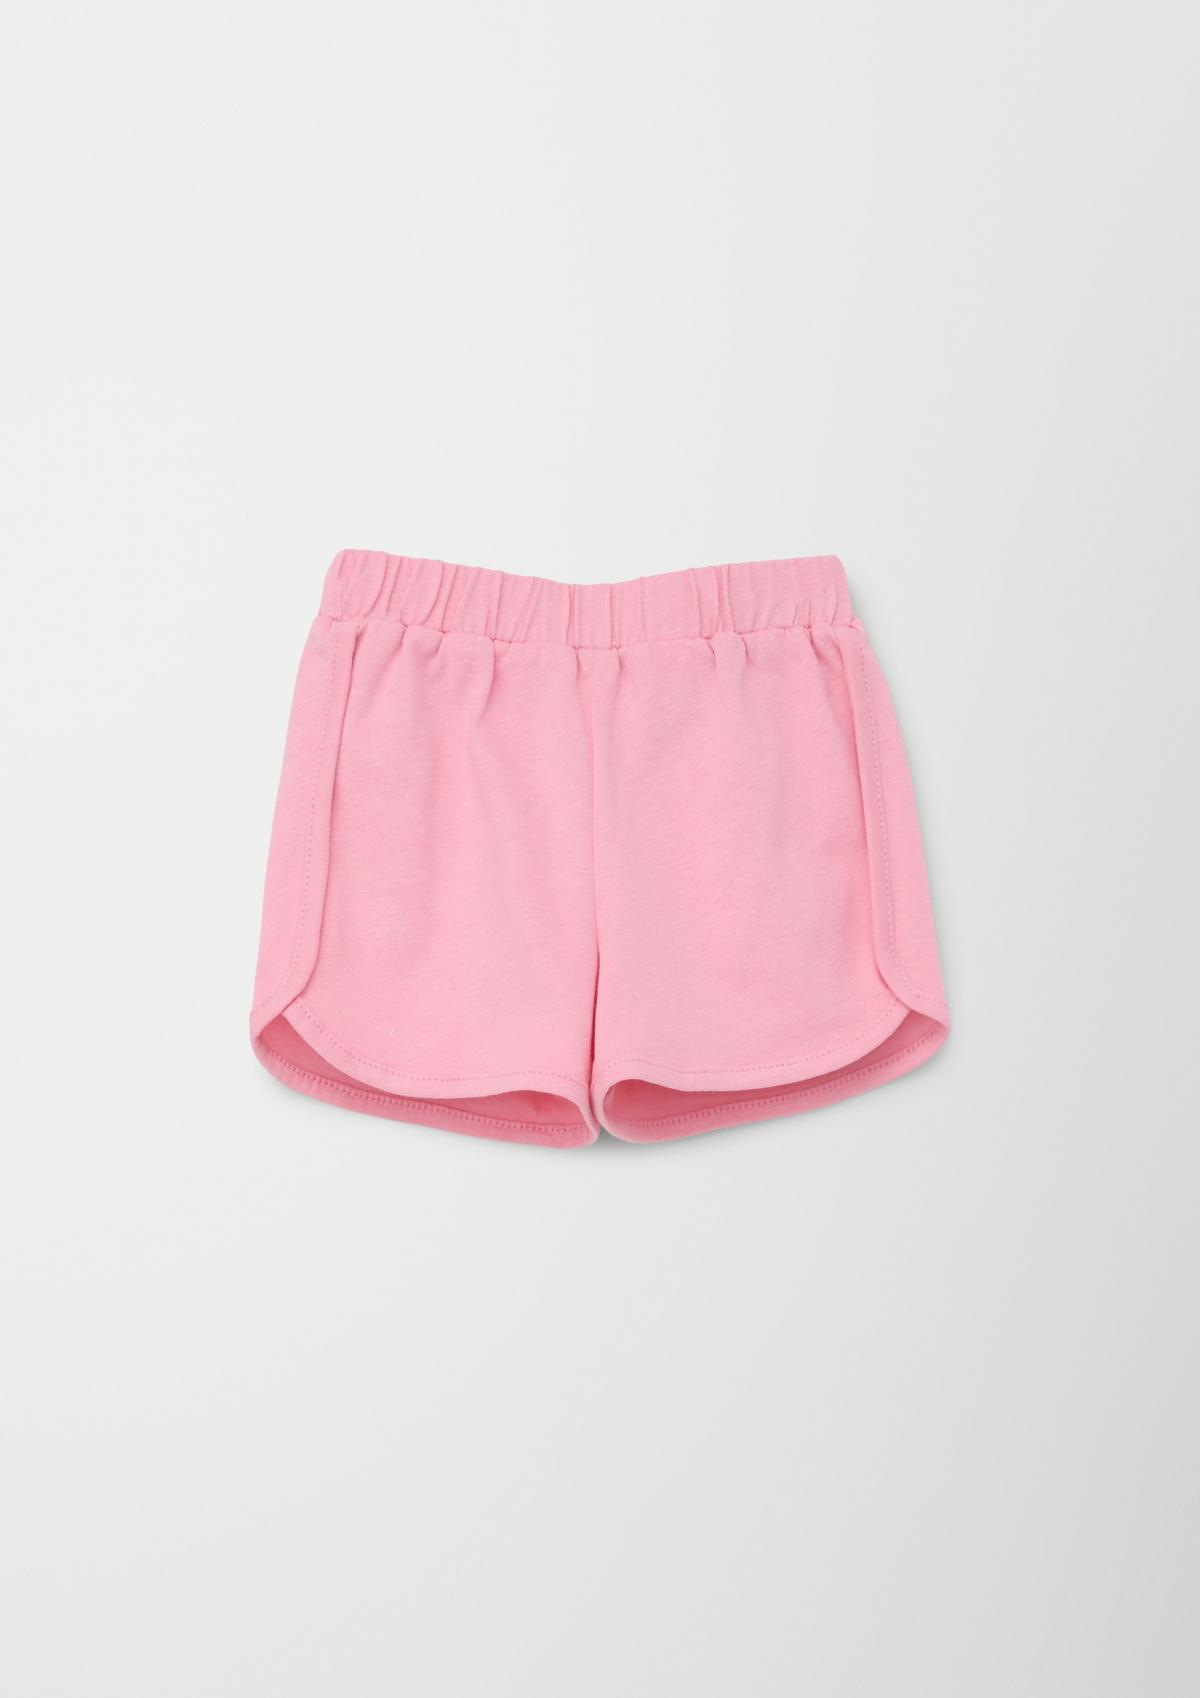 s.Oliver Shorts im sportiven Look